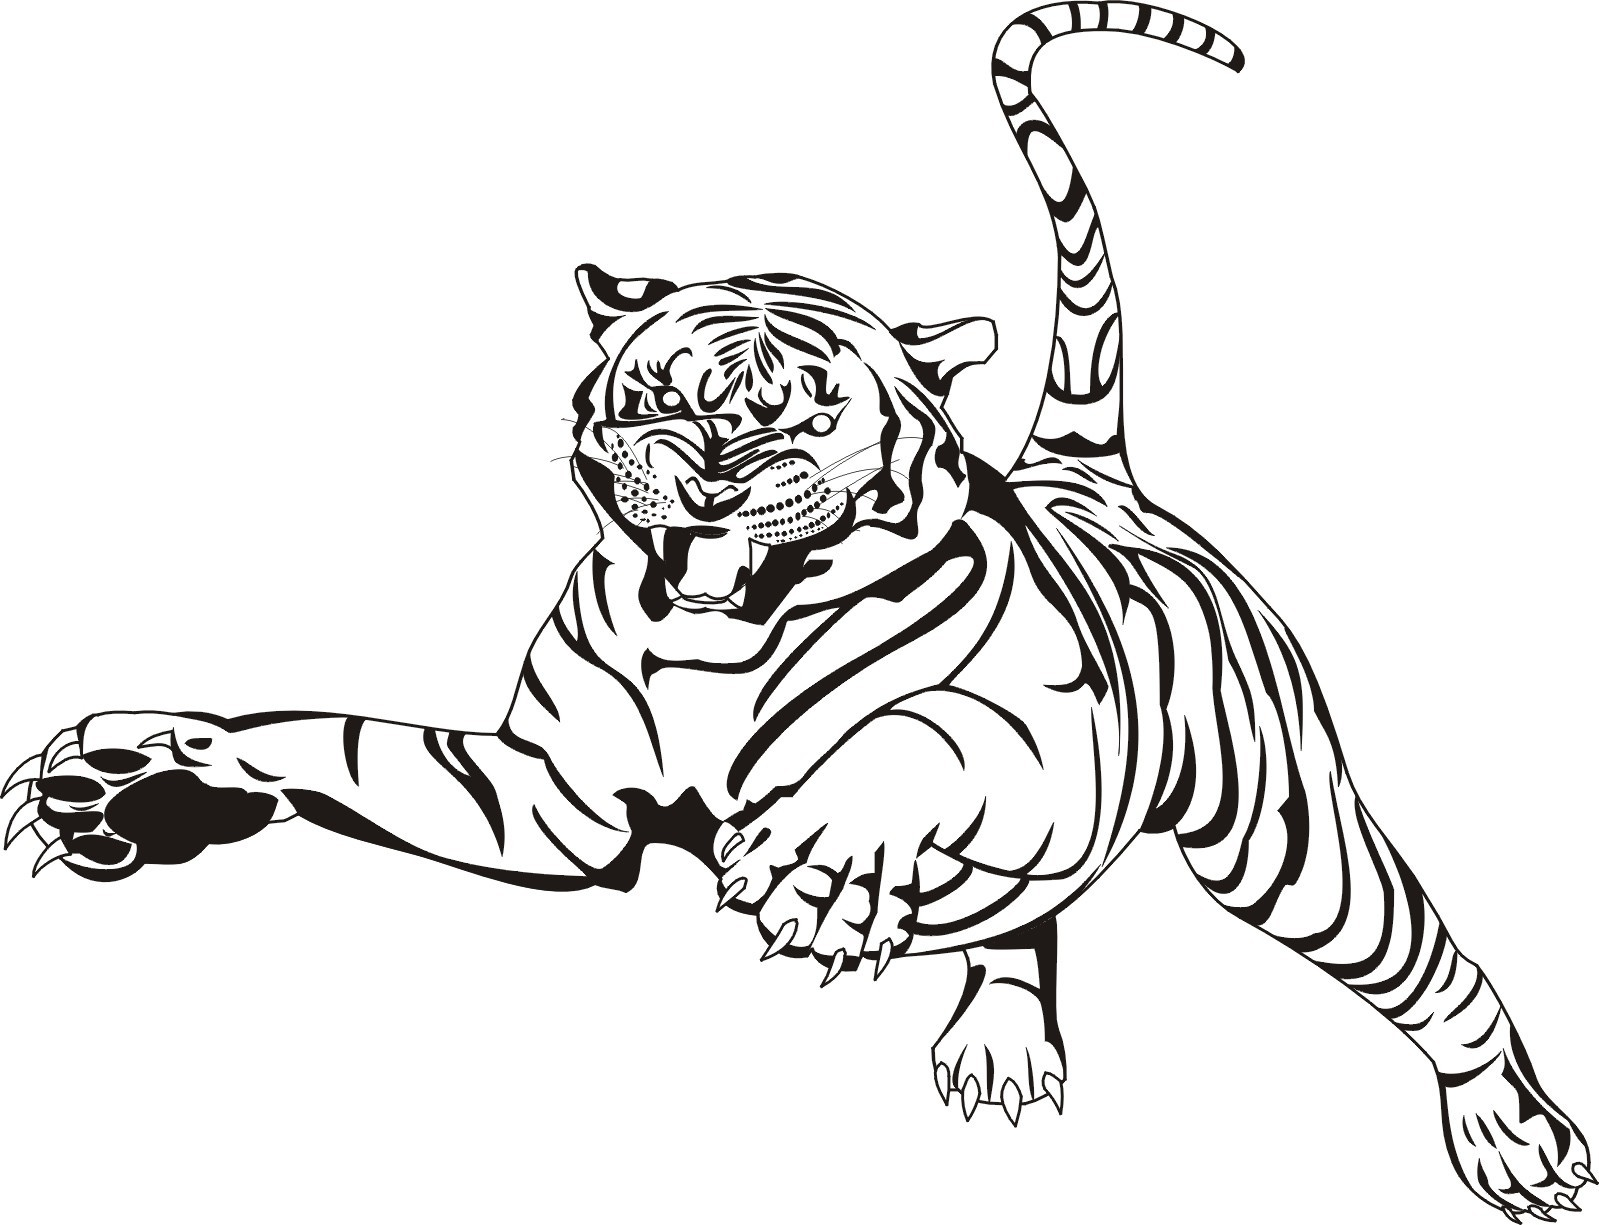 Tiger Attacking Coloring Page - Free Printable Coloring ...